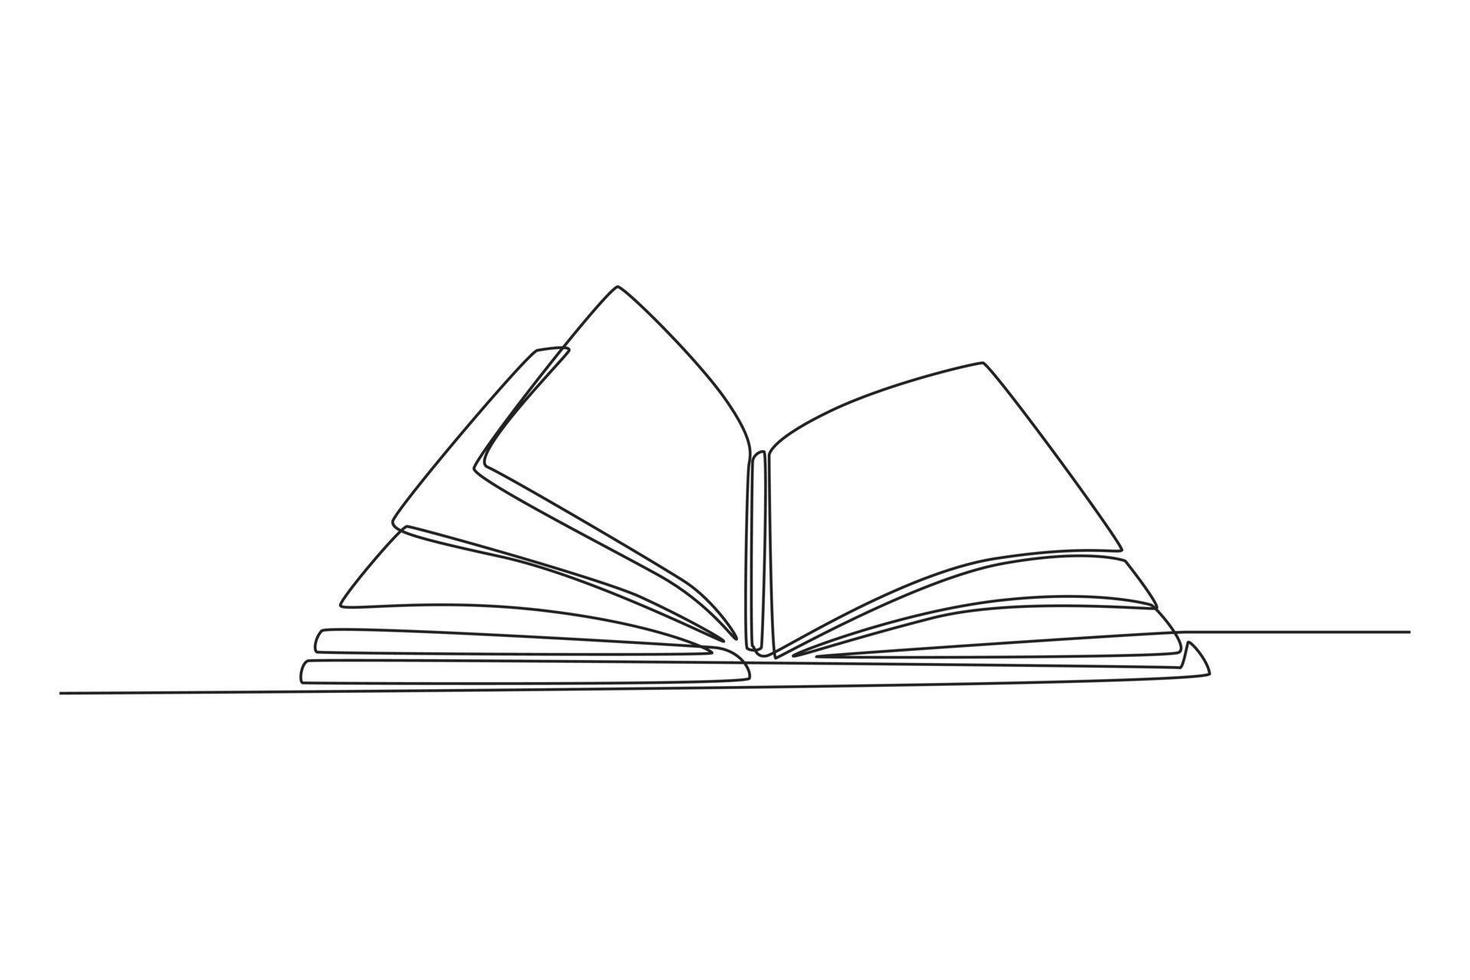 One continuous line drawing of open book with fluttering pages. Back to school concept. Single line draw design vector graphic illustration.